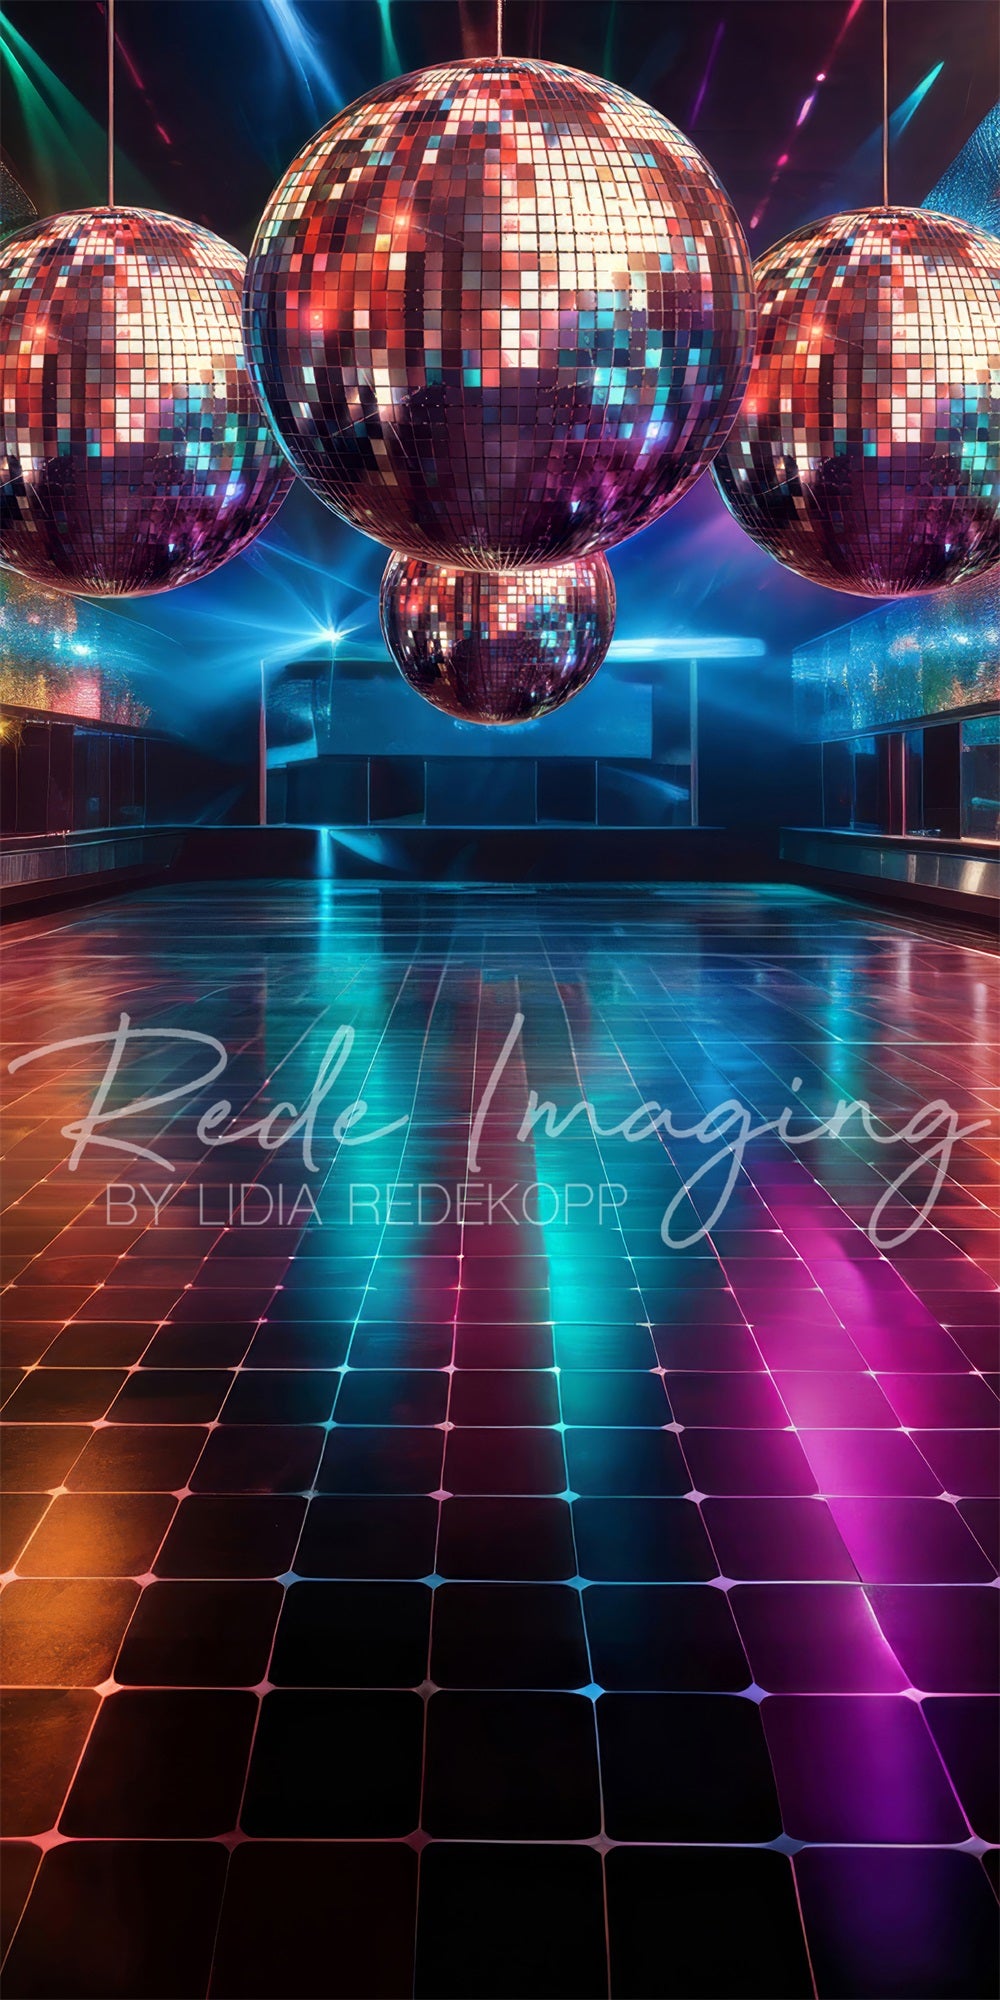 Kate Sweep Retro Indoor Cool Colorful Disco Ball Backdrop Designed by Lidia Redekopp